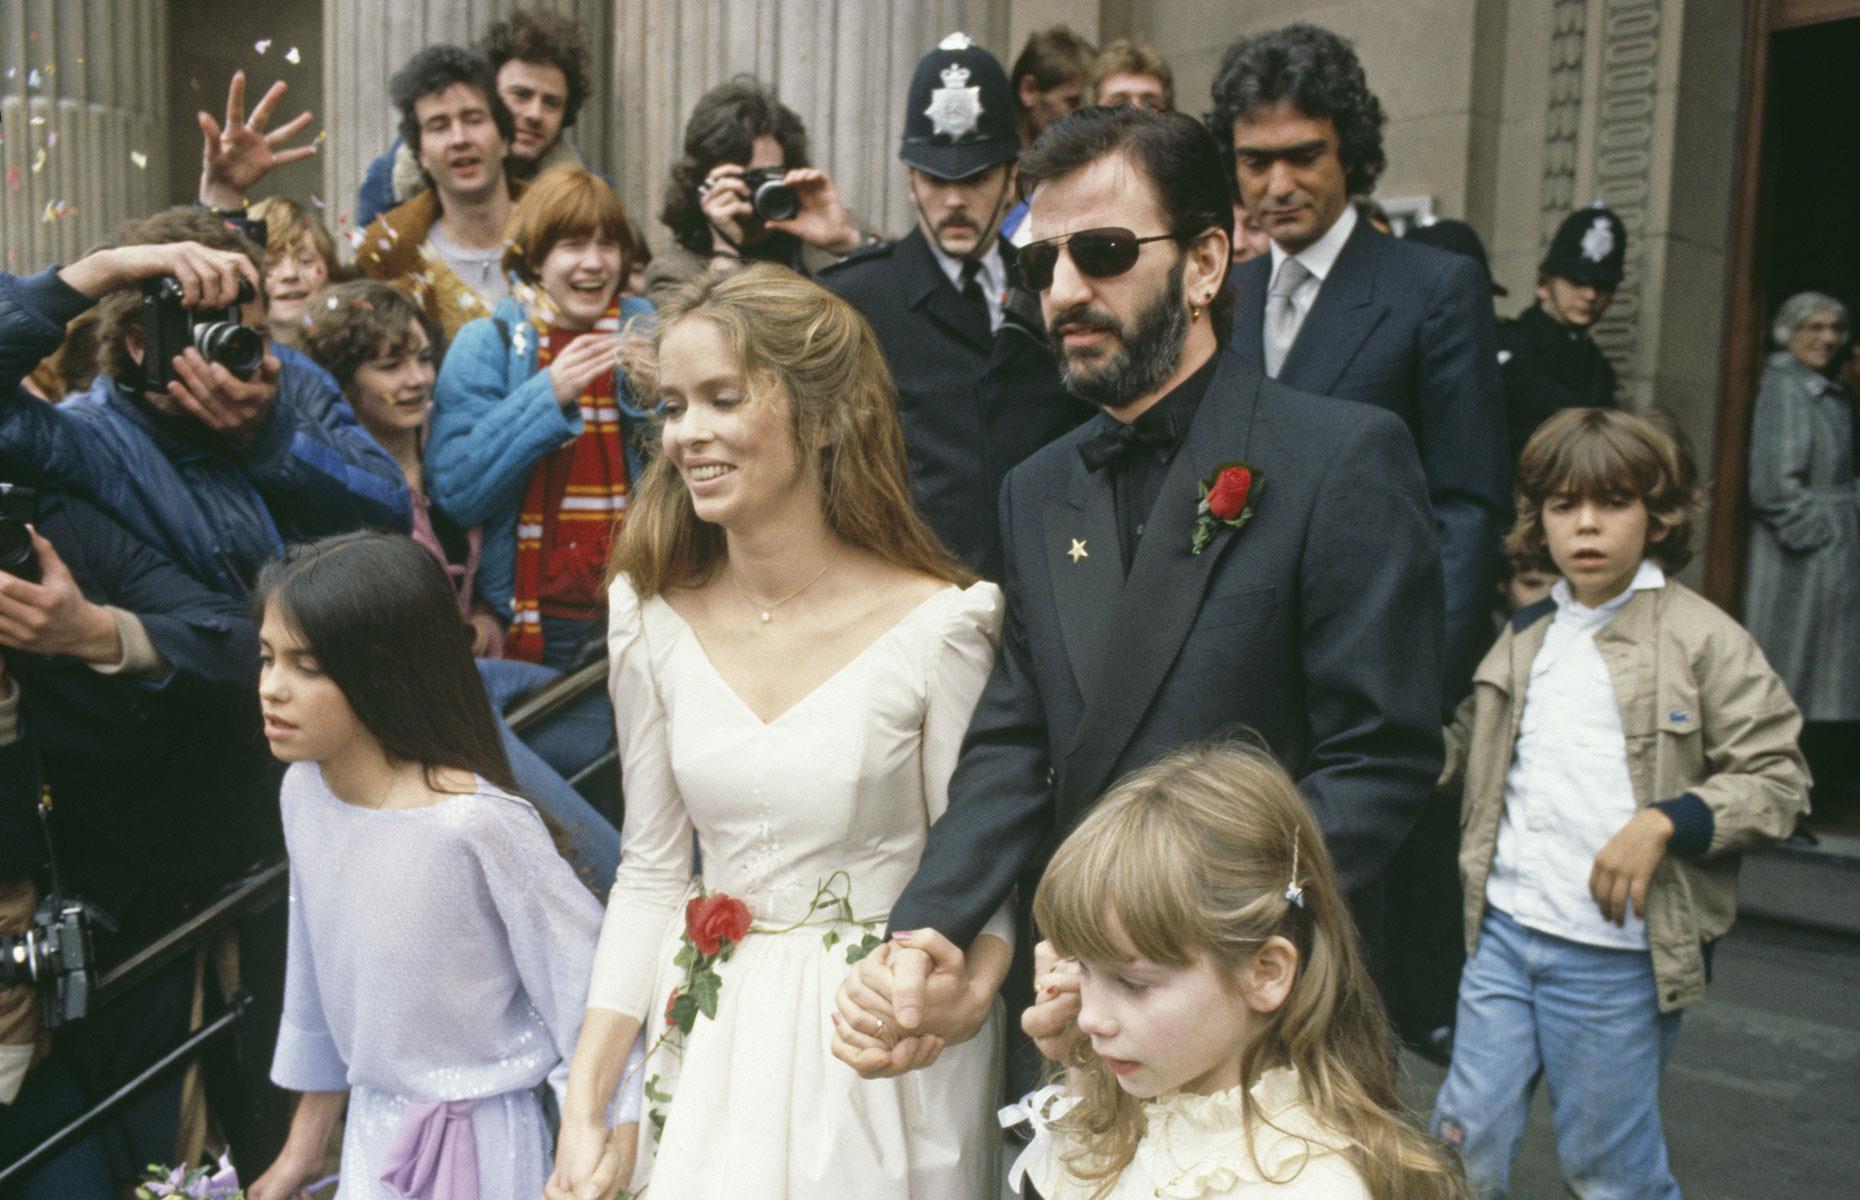 <p>Born in 1972, Gianni Gregorini is the son of Count Augusto Gregorini Savignano di Romagna and <em>Bond</em> girl Barbara Bach. Bach later divorced the Italian aristocrat and married Ringo Starr in 1981.</p>  <p>A young Gianni is pictured on the right of this photo, which was taken shortly after the wedding at London's Marylebone Town Hall.</p>